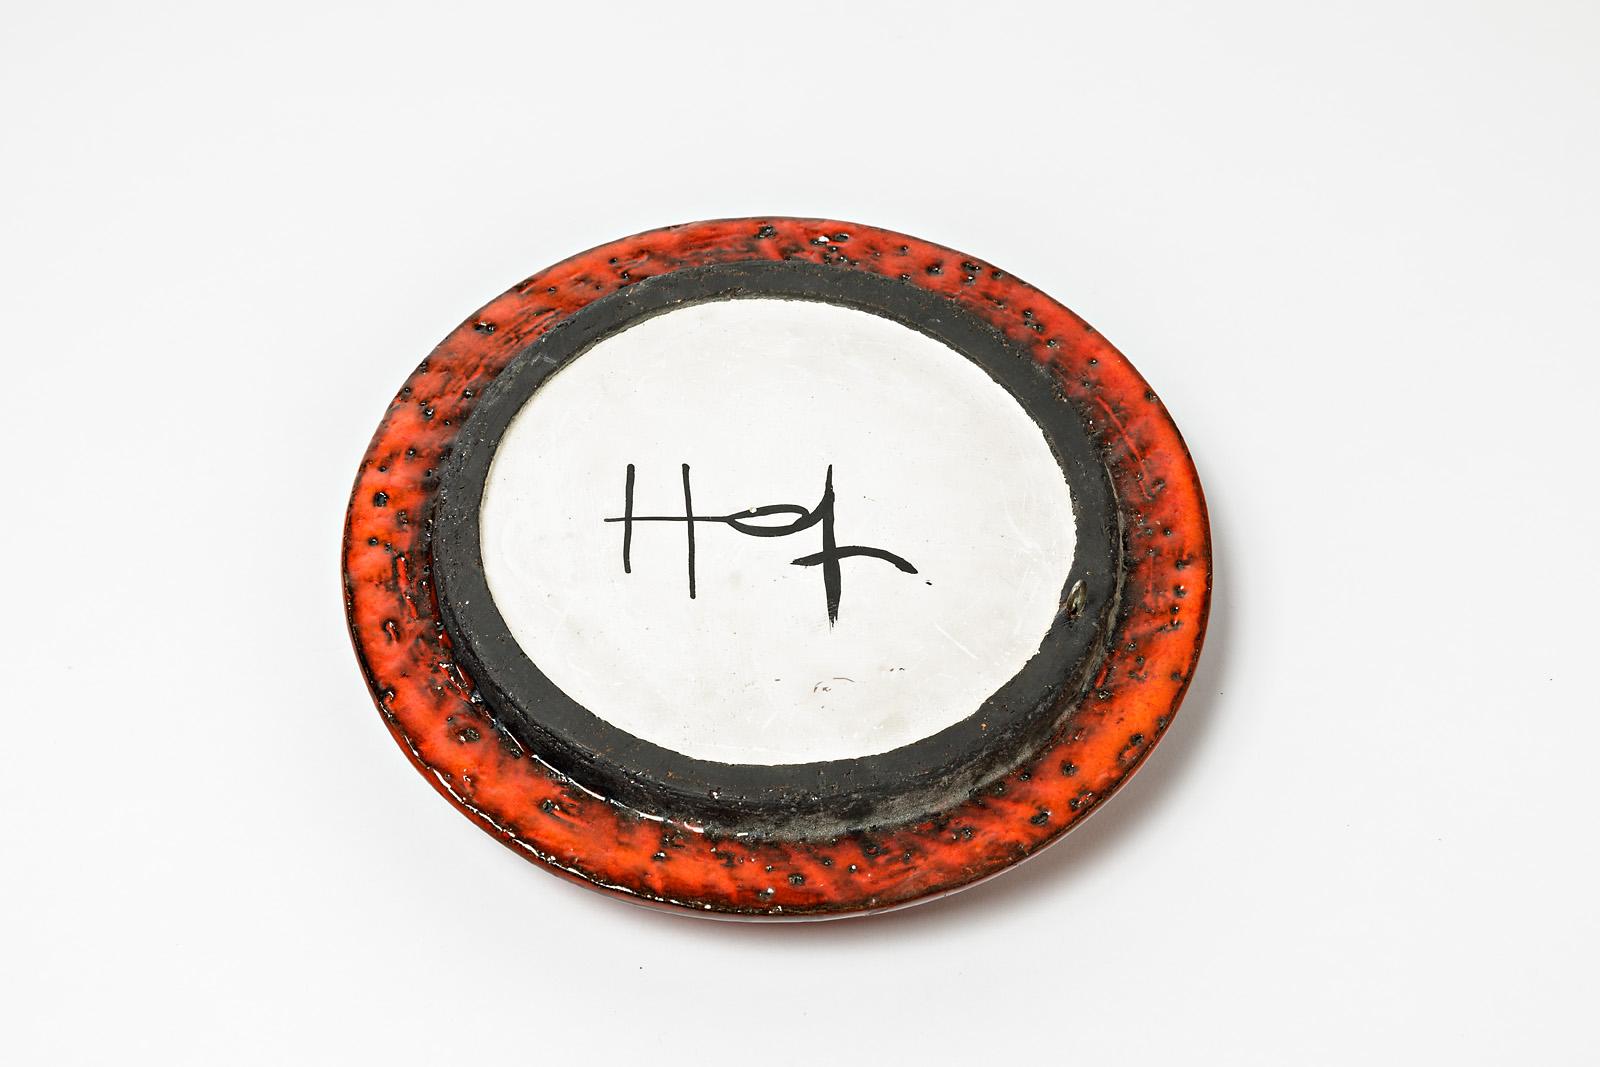 Beaux Arts Ceramic Mirror with Red Glaze Decoration by Gerard Hofmann, Vallauris, 1970 For Sale